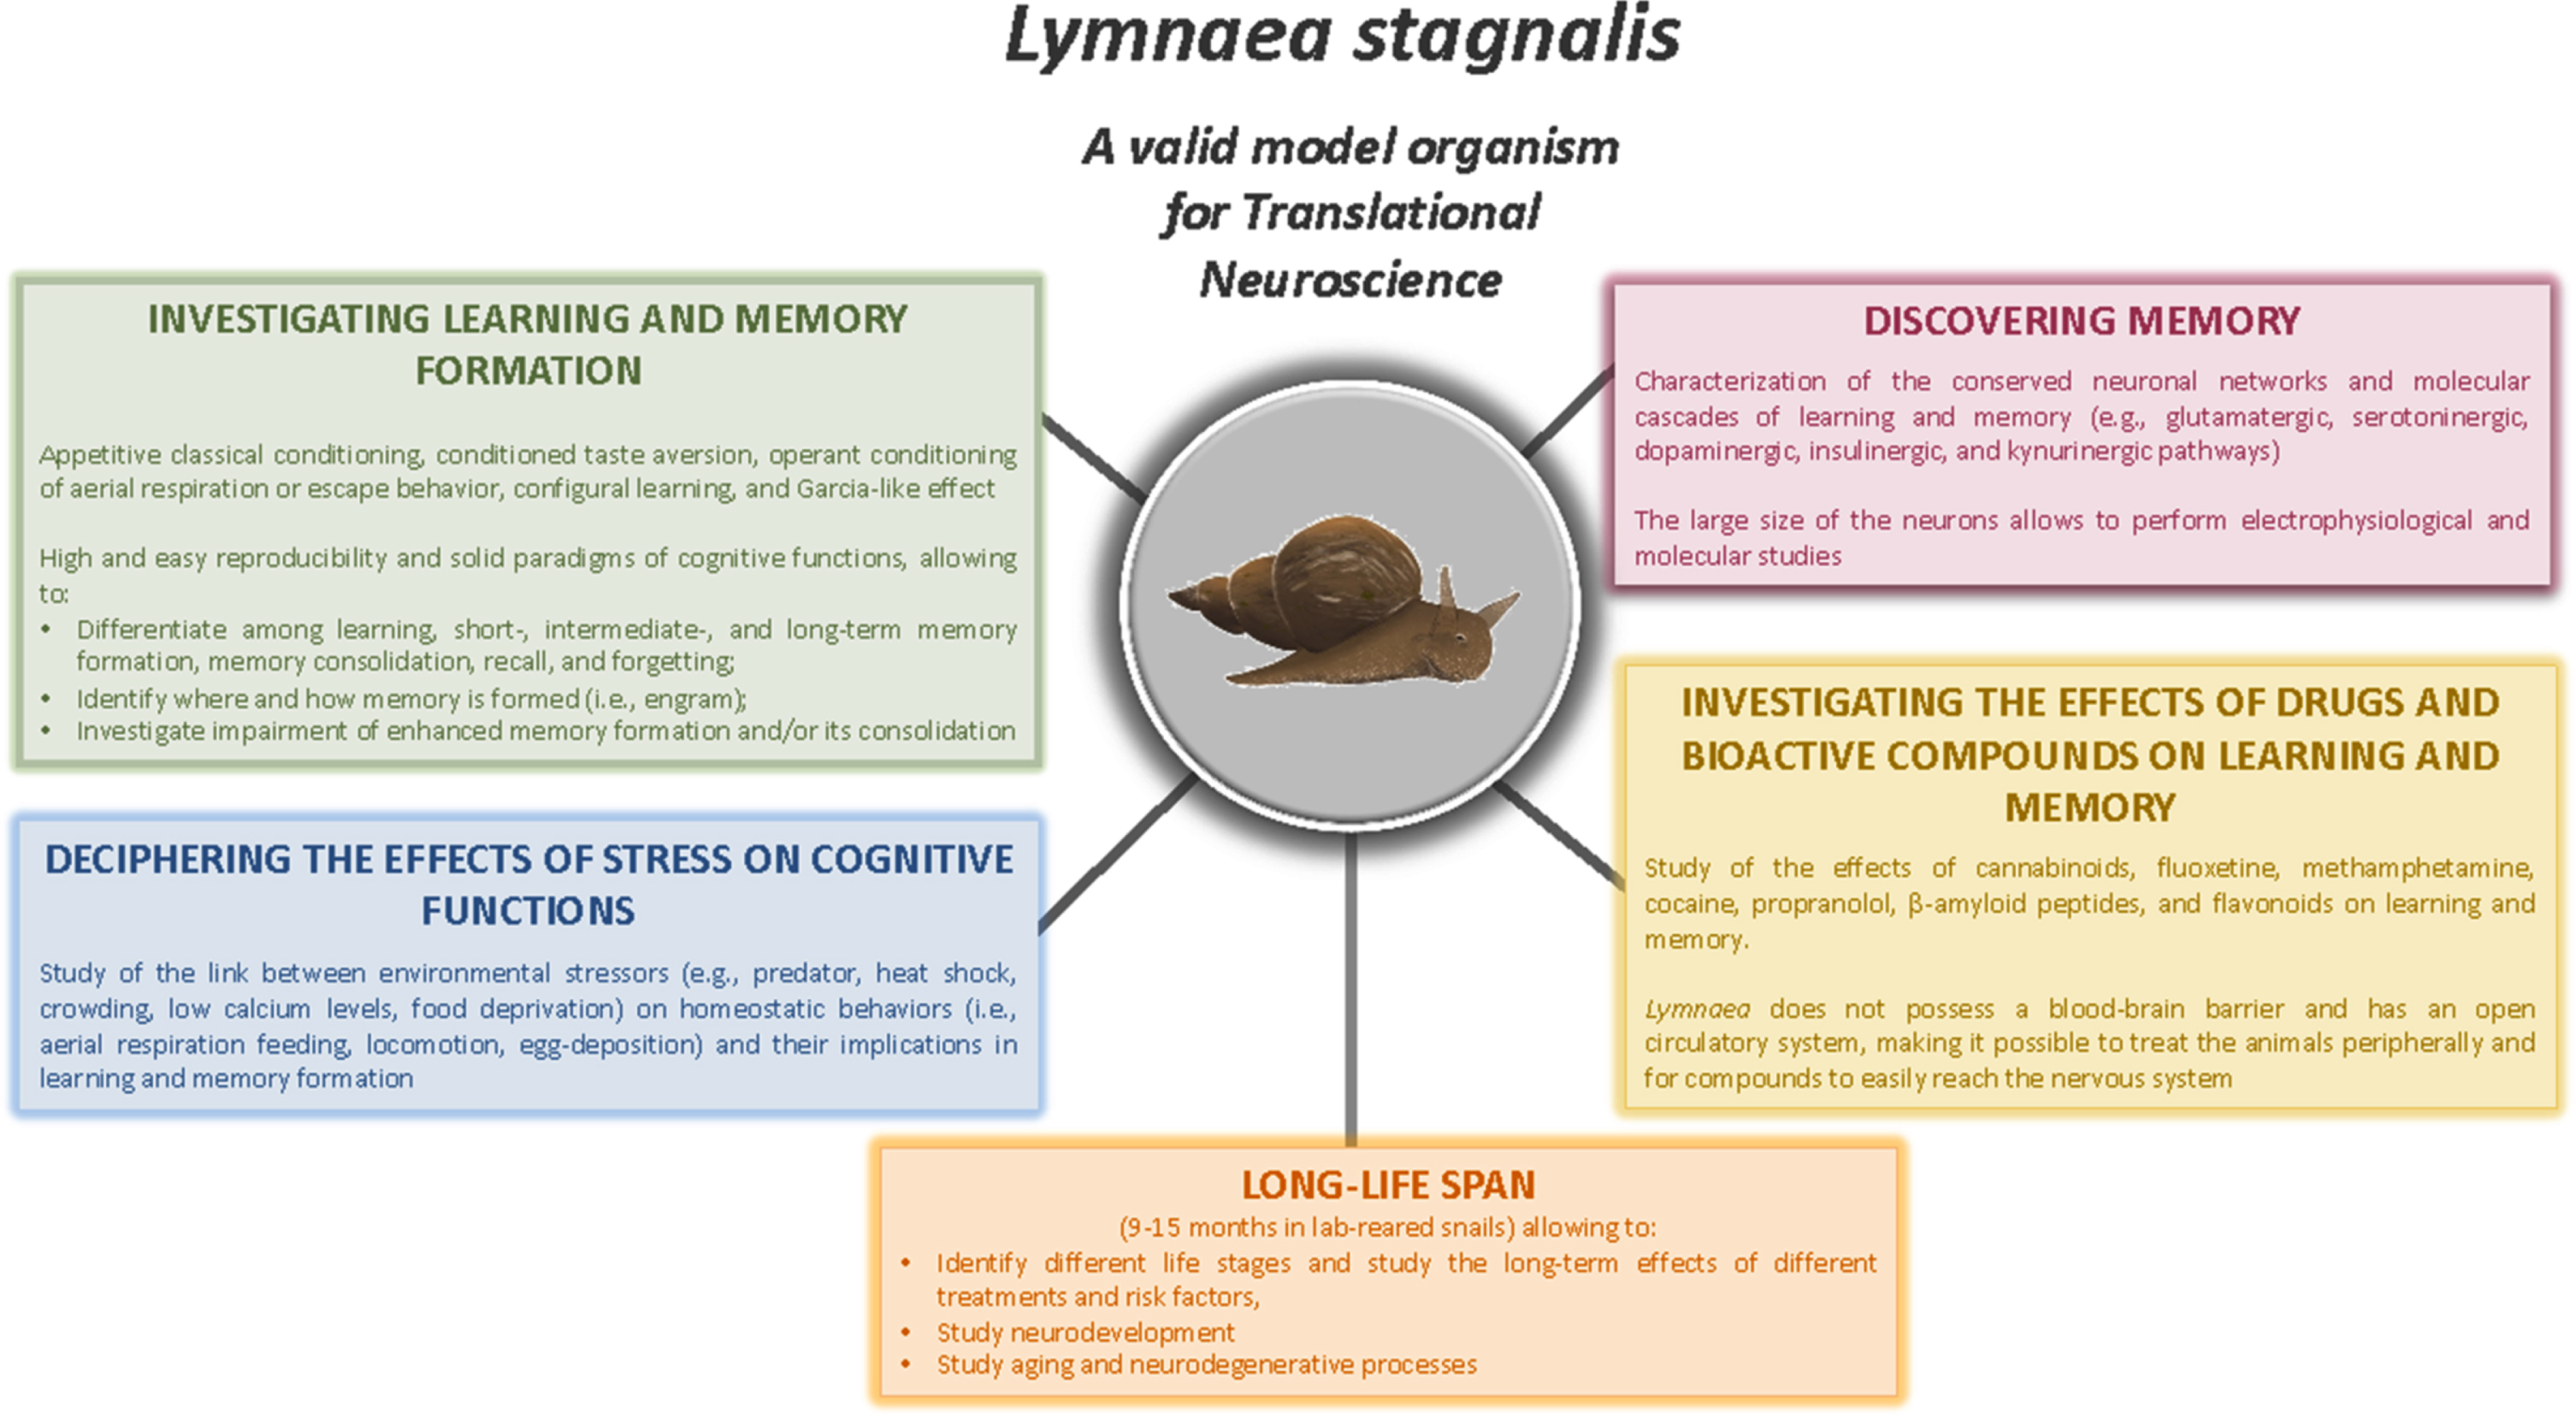 Studies that can be performed using Lymnaea stagnalis as a model organism for Translational Neuroscience research, offering an array of advantages for exploring the conserved mechanisms underlying the effects of bioactive compounds (e.g., Flavonoids), drugs, and environmental stressors on cognitive functions and aging-related processes.